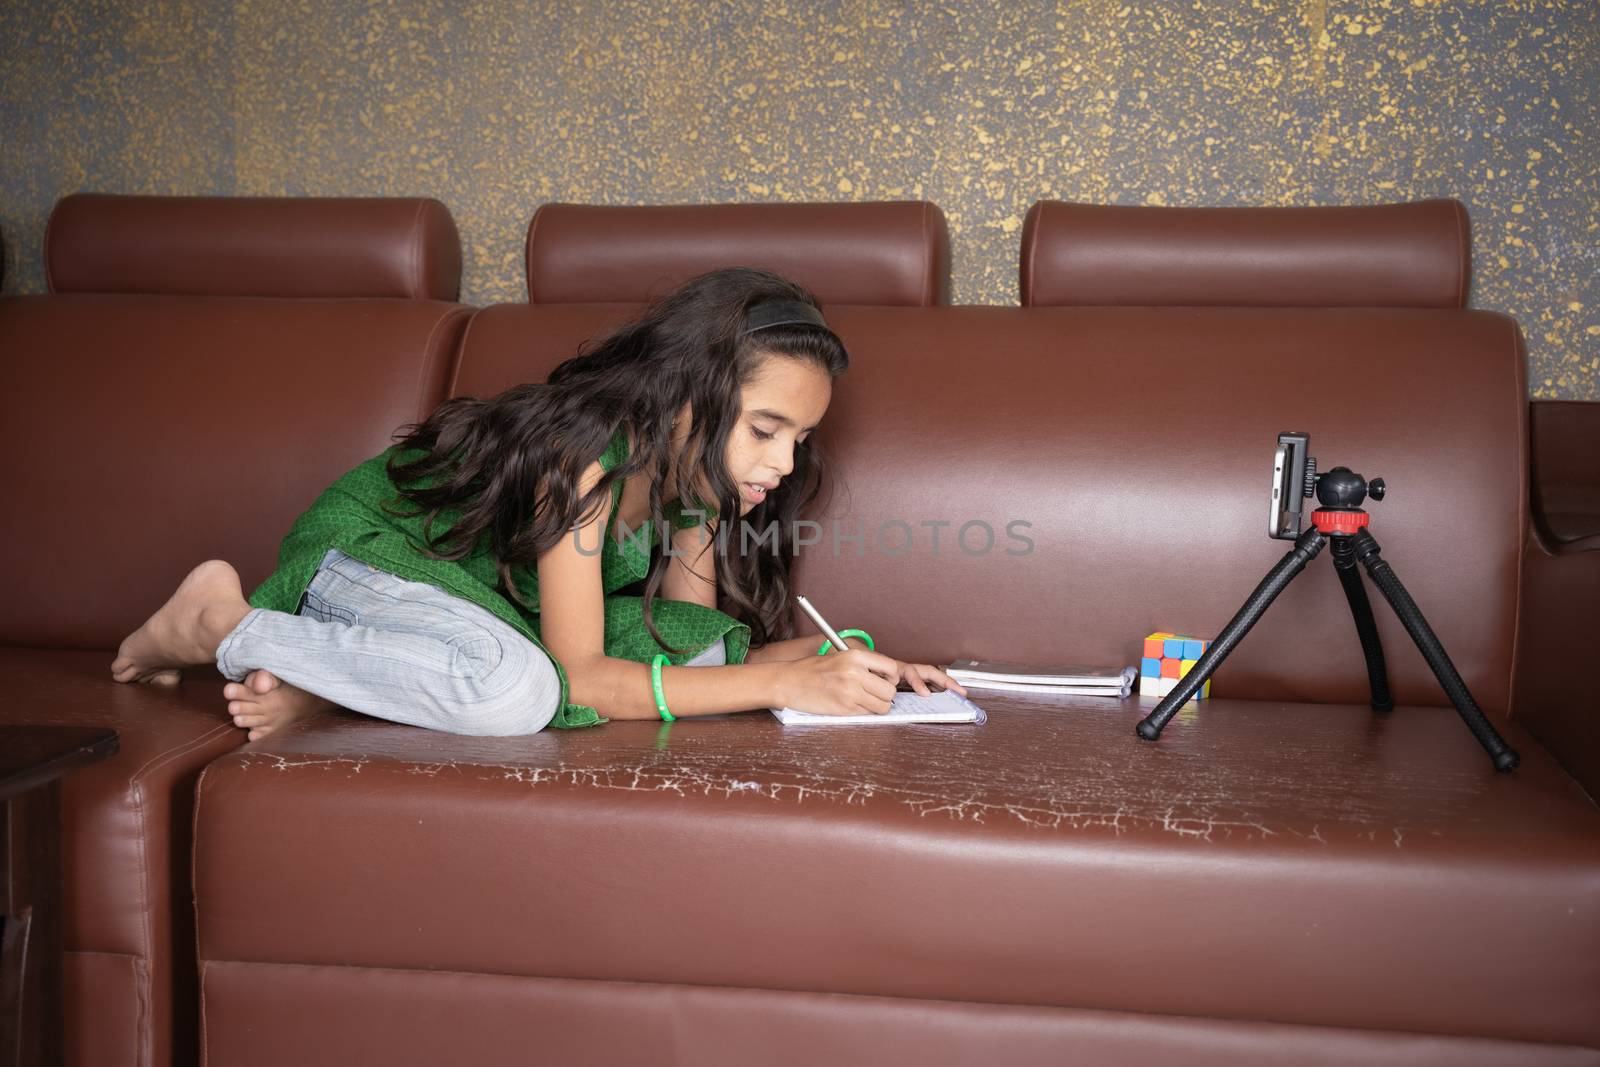 Concept of improper, lazy and way of studying during homeschooling or e-learning and make kids sleepy or boredom, young girl busy in writing by looking into mobile on sofa during covid-19 pandemic.